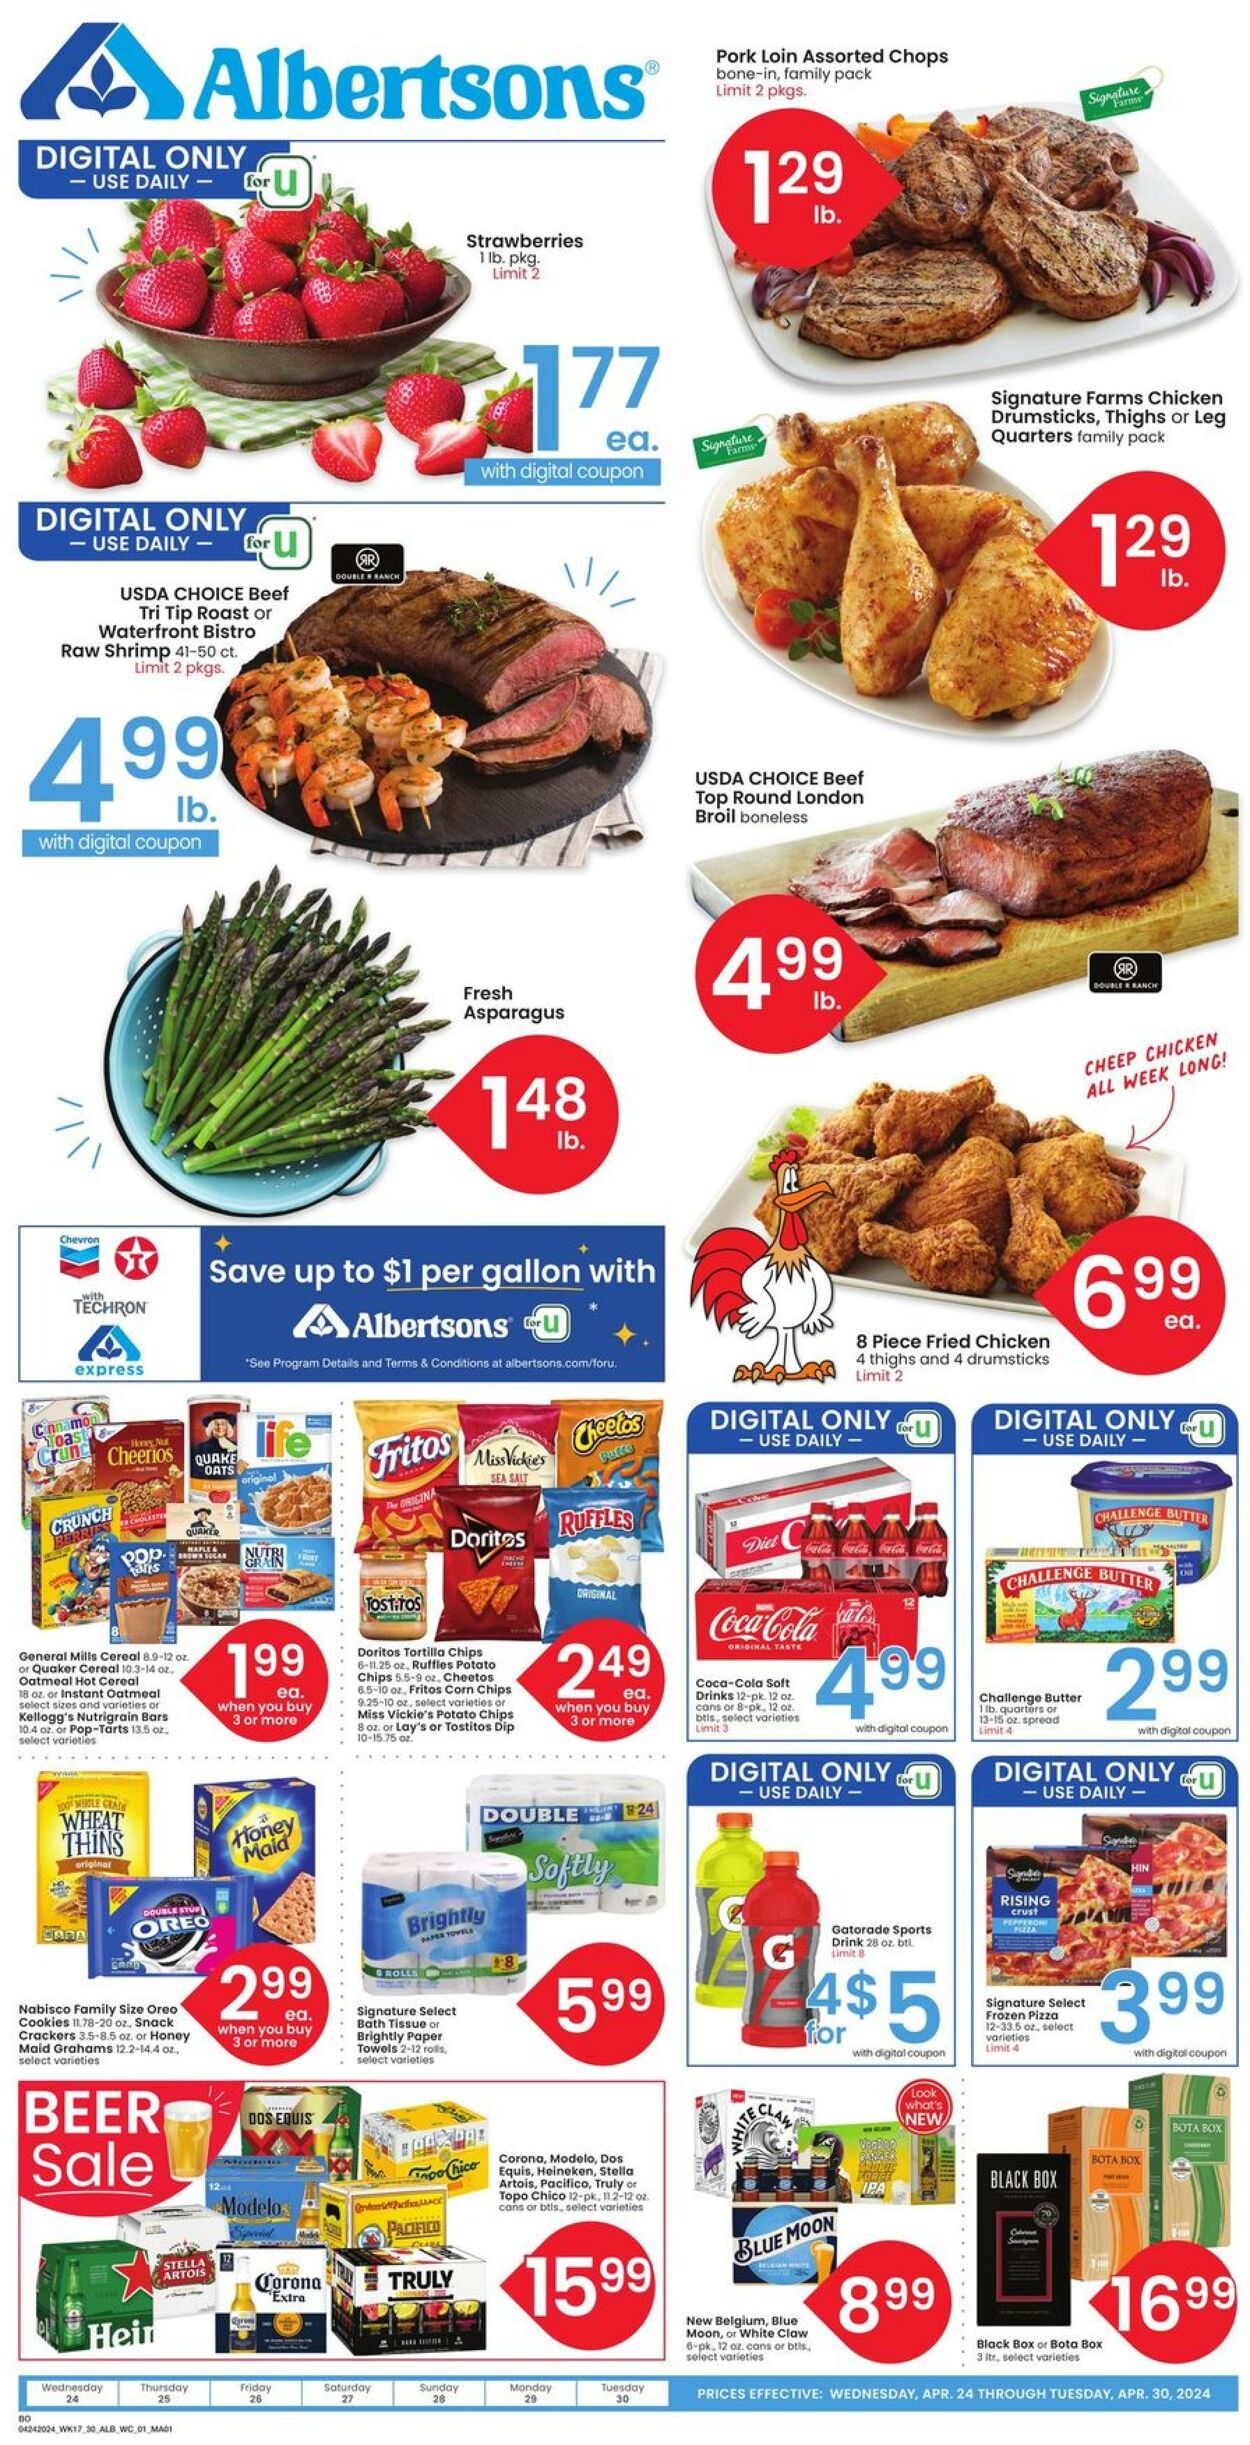 Albertsons Promotional weekly ads